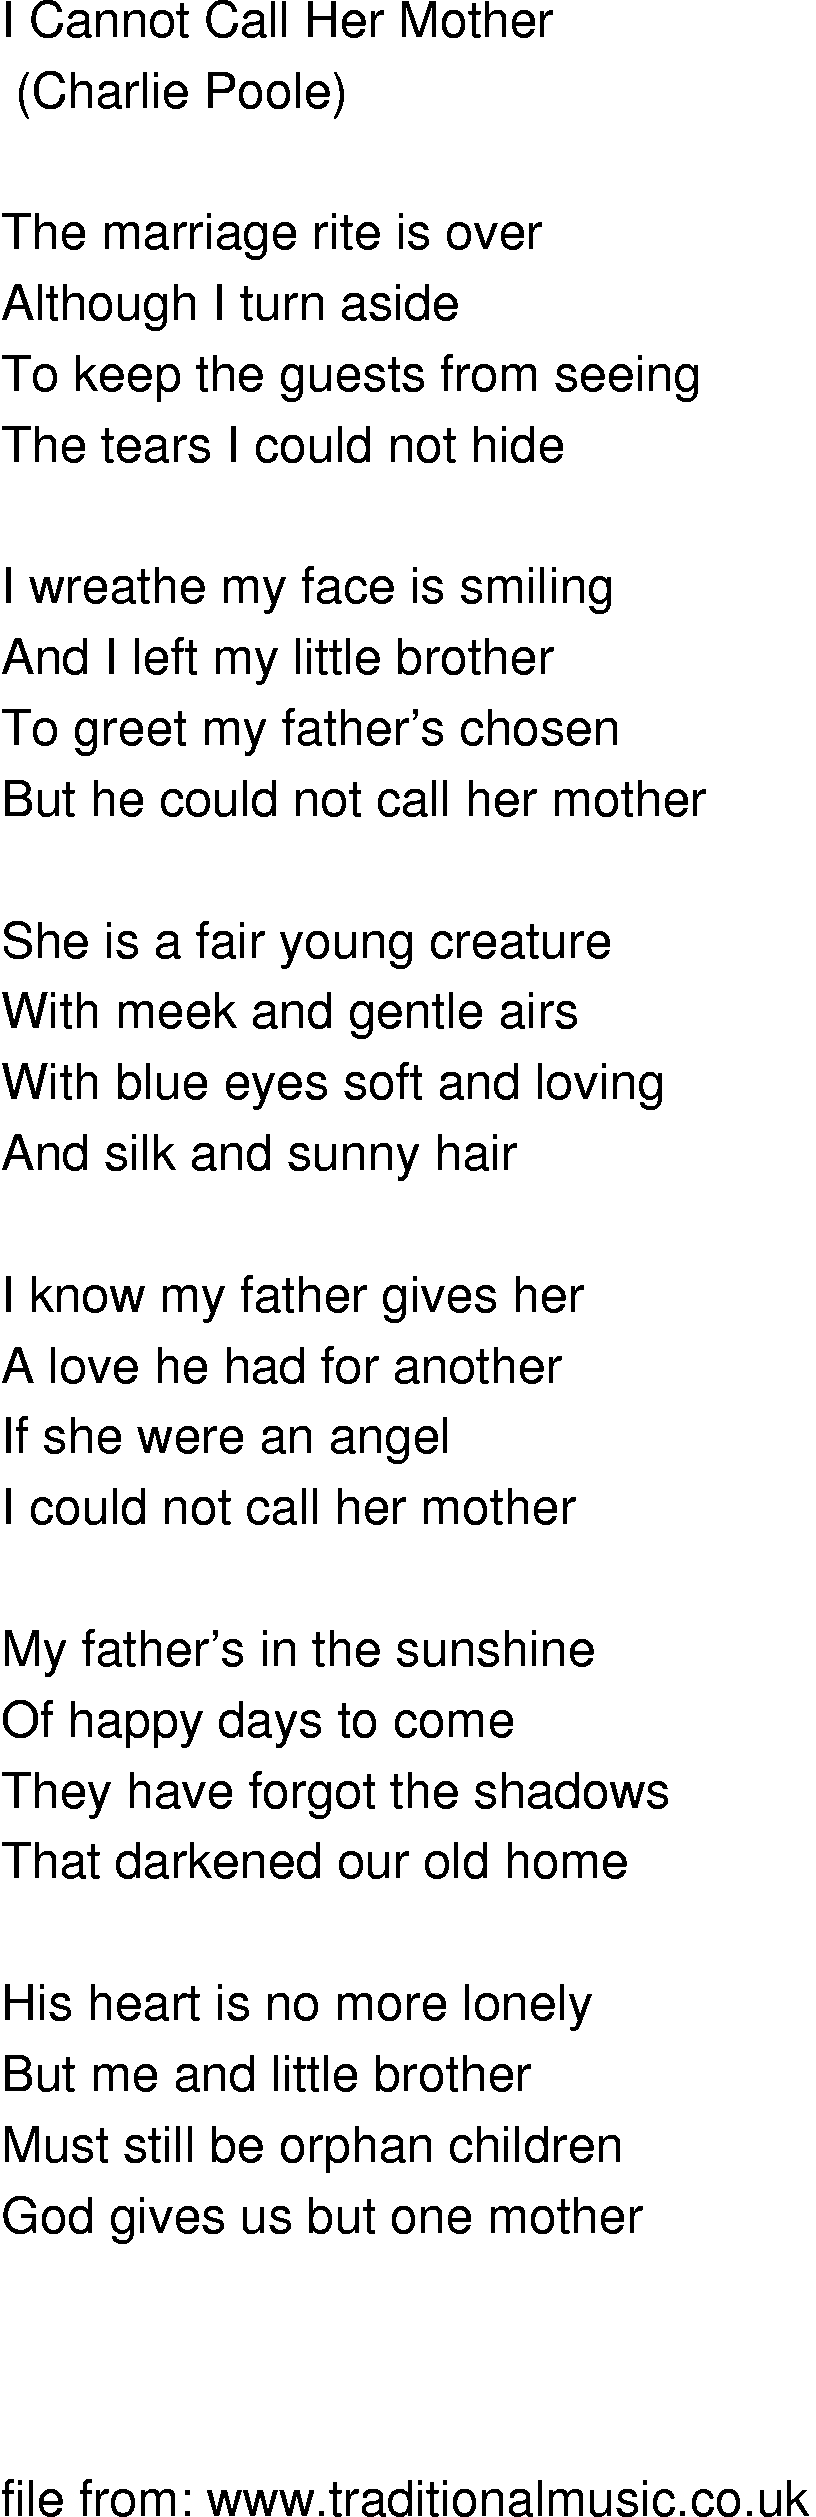 Old-Time (oldtimey) Song Lyrics - i cannot call her mother